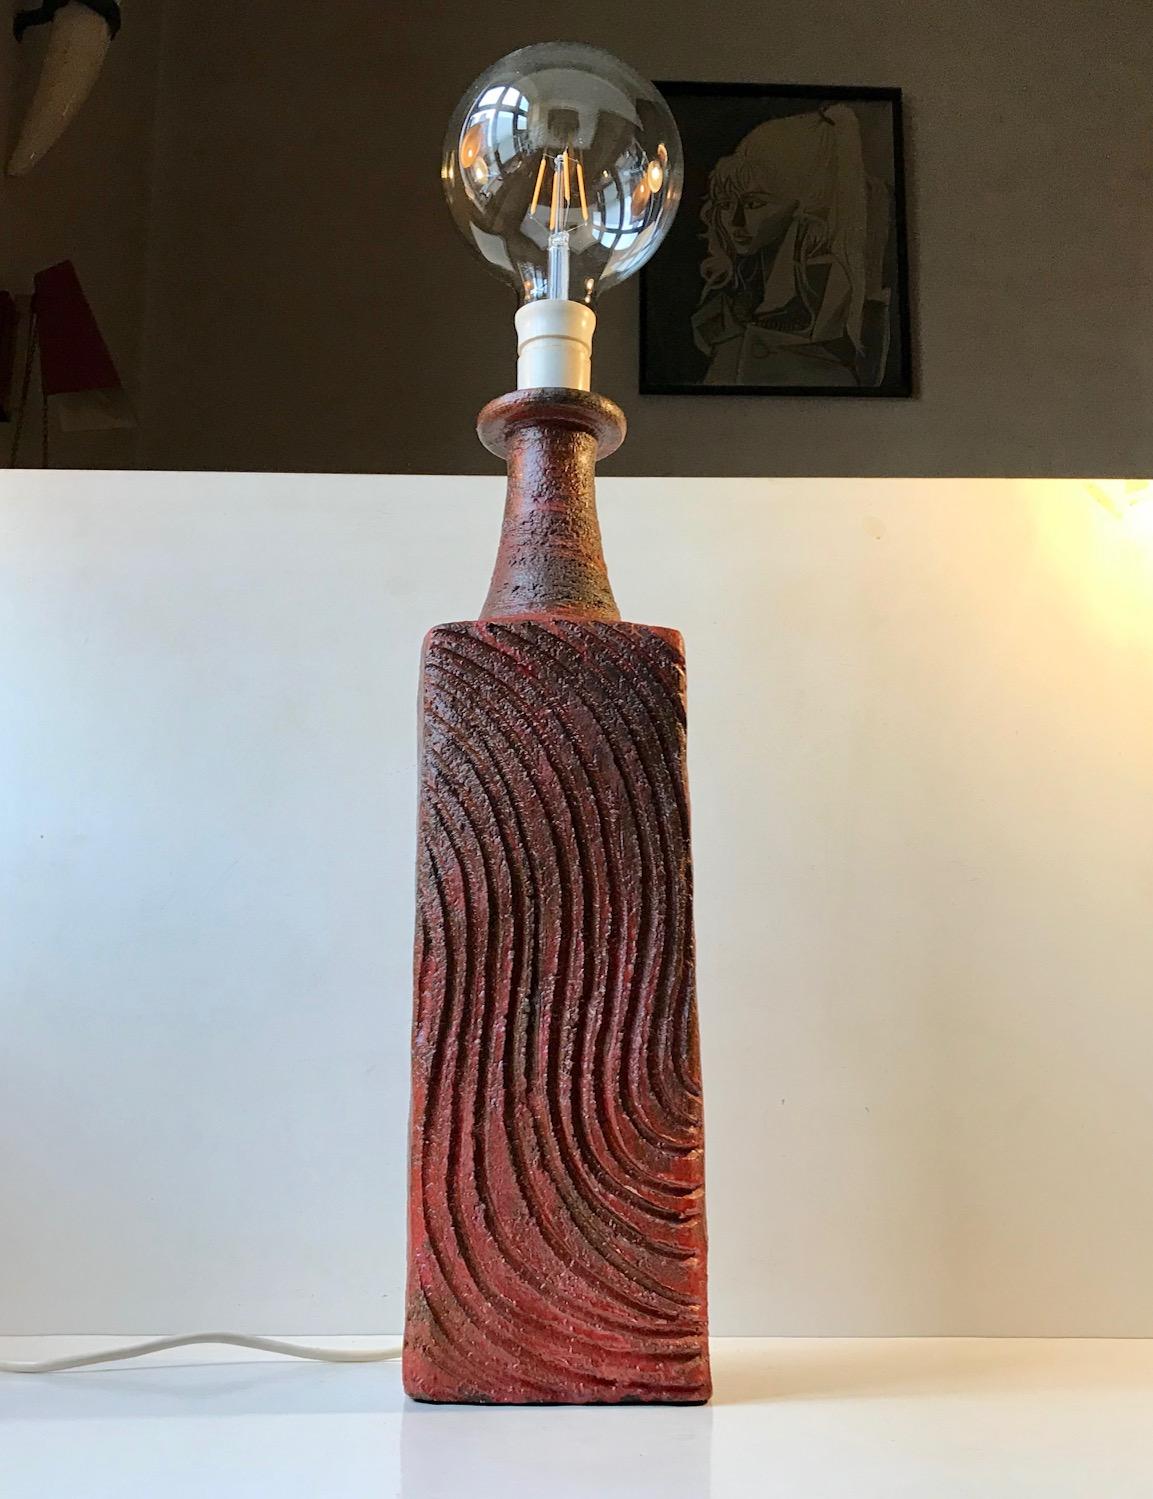 Unusually glazed monumental table lamp in stoneware. Decorated with vertical hand-incised waves. Presumably from a Studio in Ribe Denmark where its was made as a piece unique during the 1970s. Its signed indistinguishable to the side. Measurements: